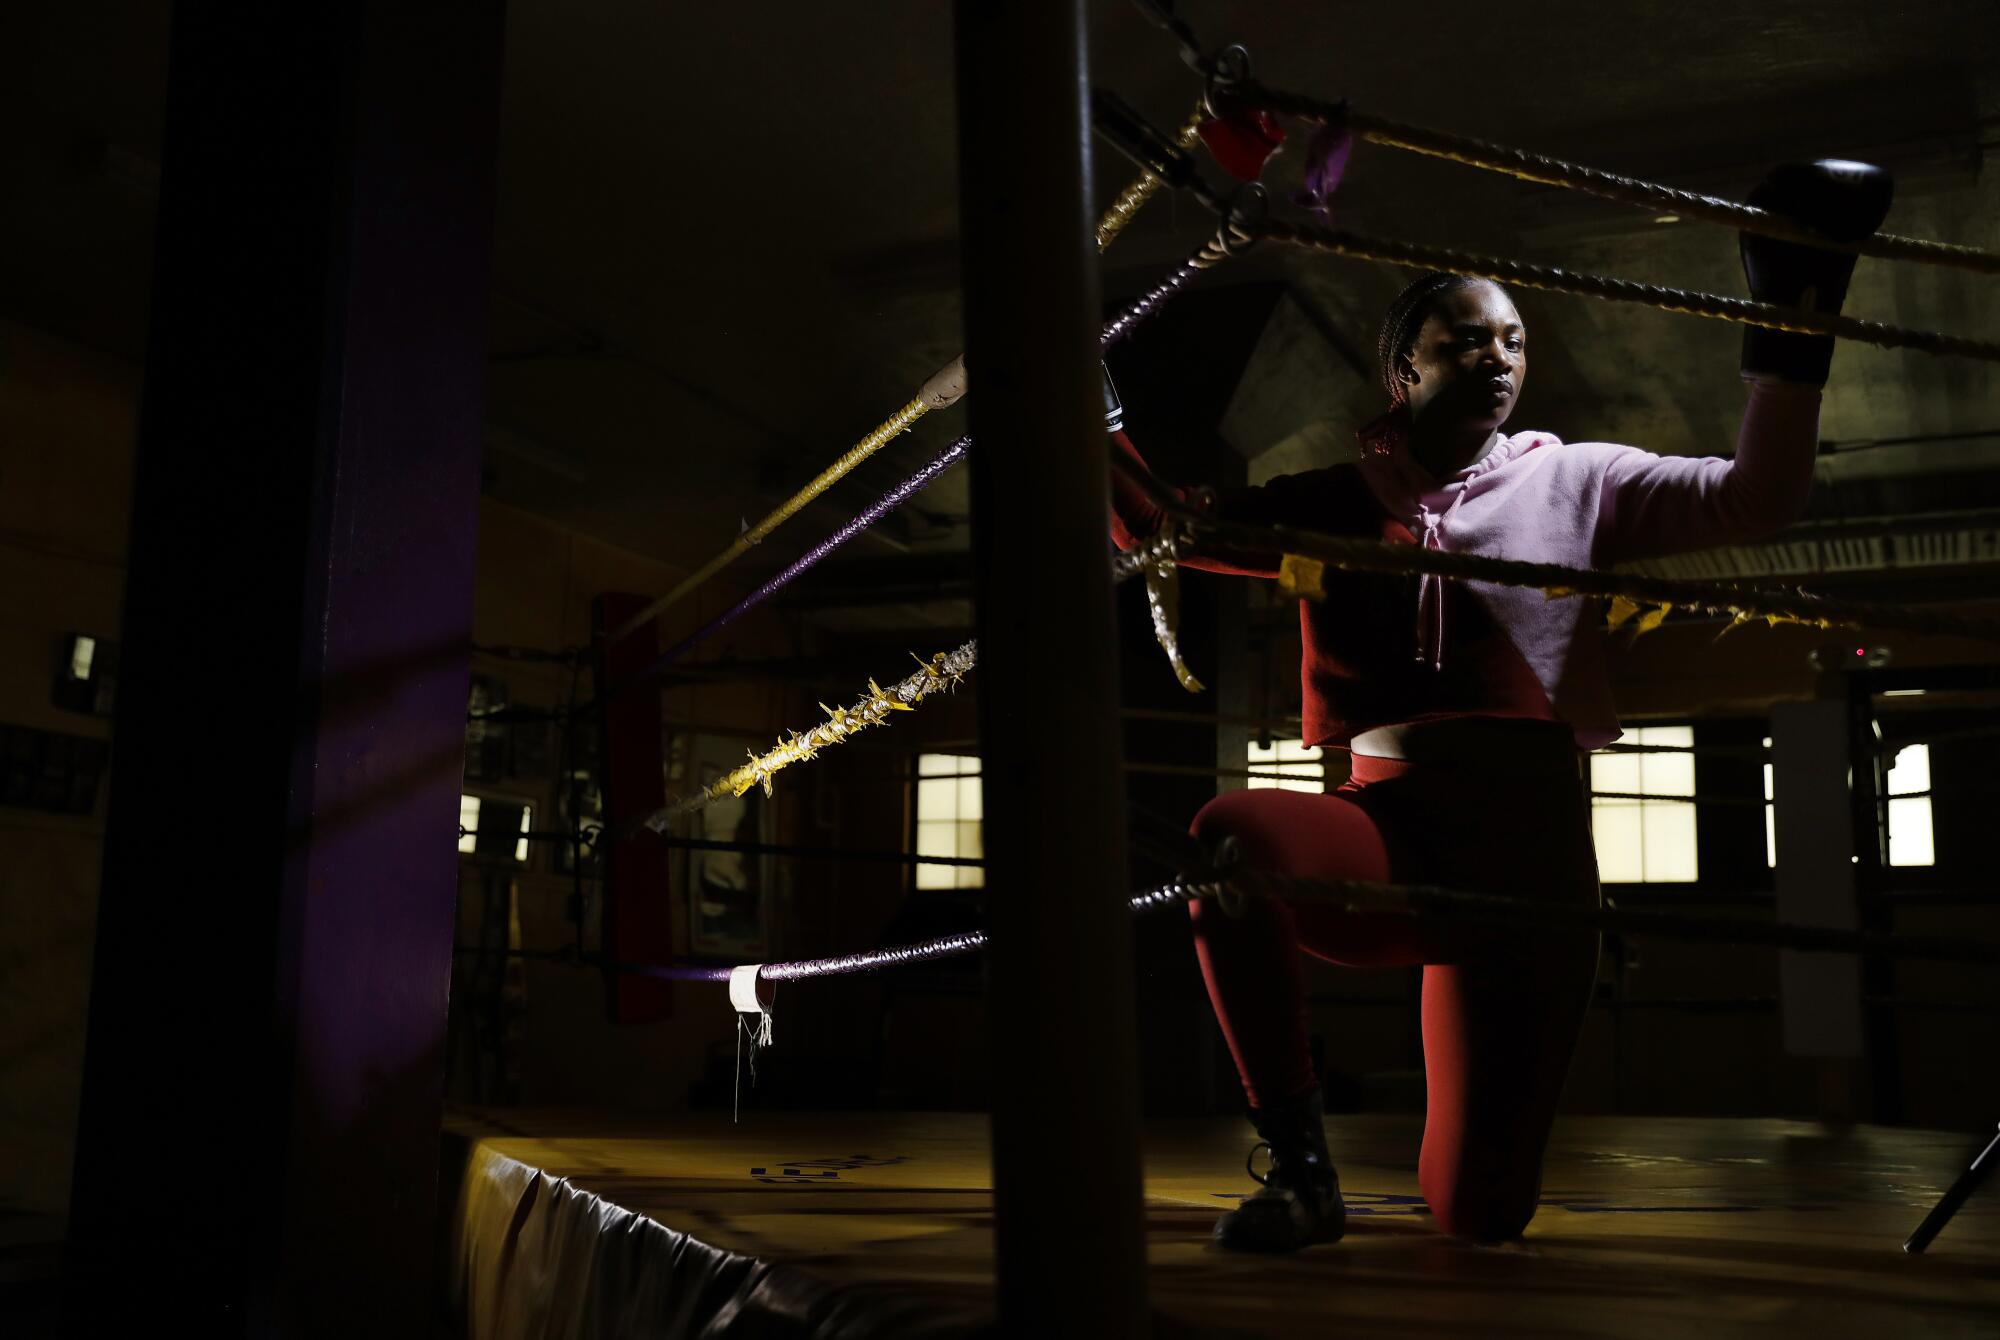 Claressa Shields says she was headed for trouble when, at 13, she was baptized in a church in Flint, Mich. Photographed at the Berston Field House in Flint, Mich.